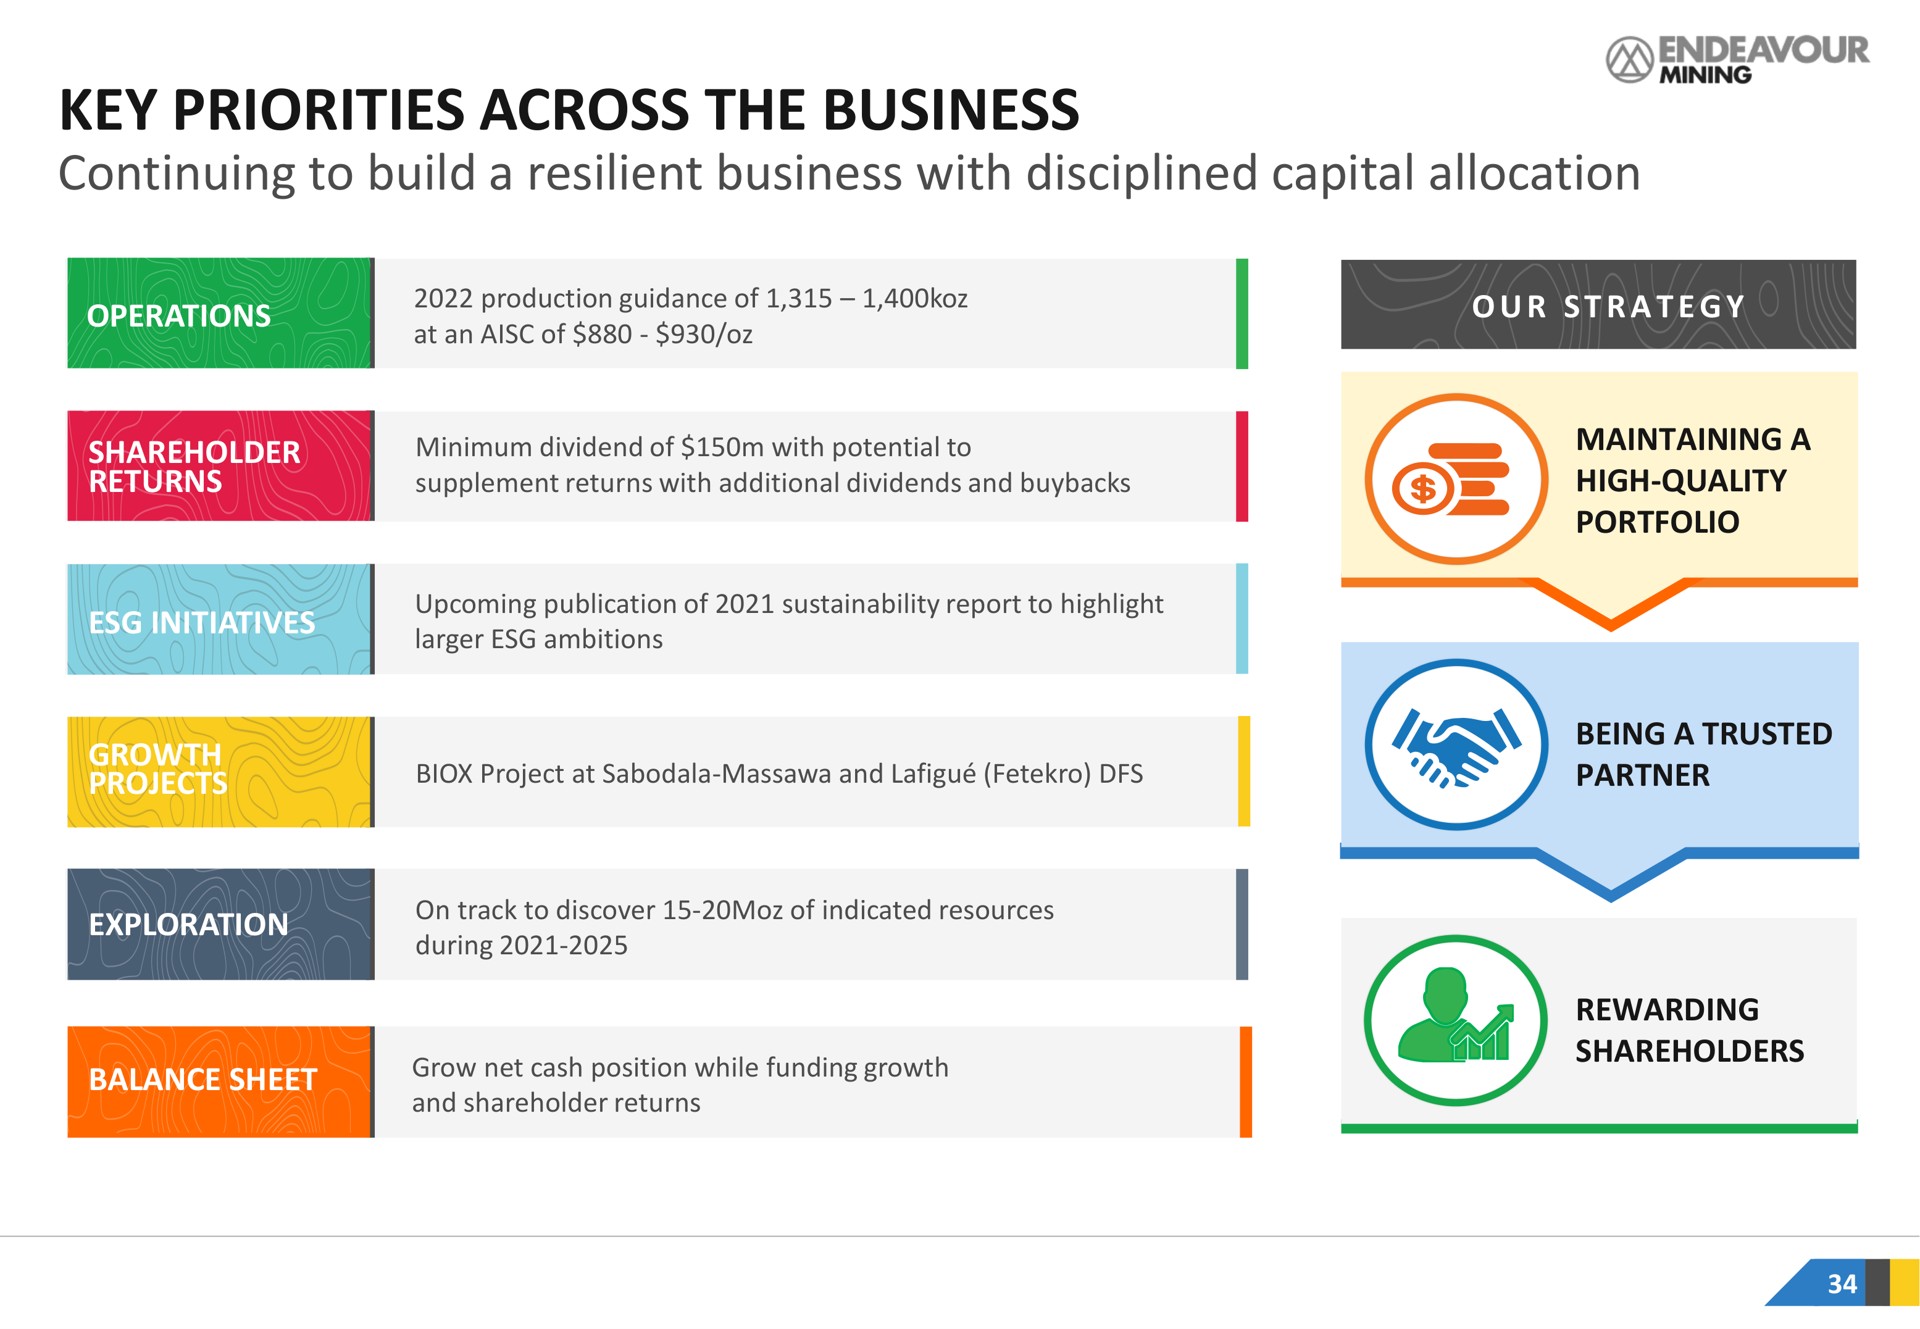 key priorities across the business continuing to build a resilient business with disciplined capital allocation | Endeavour Mining